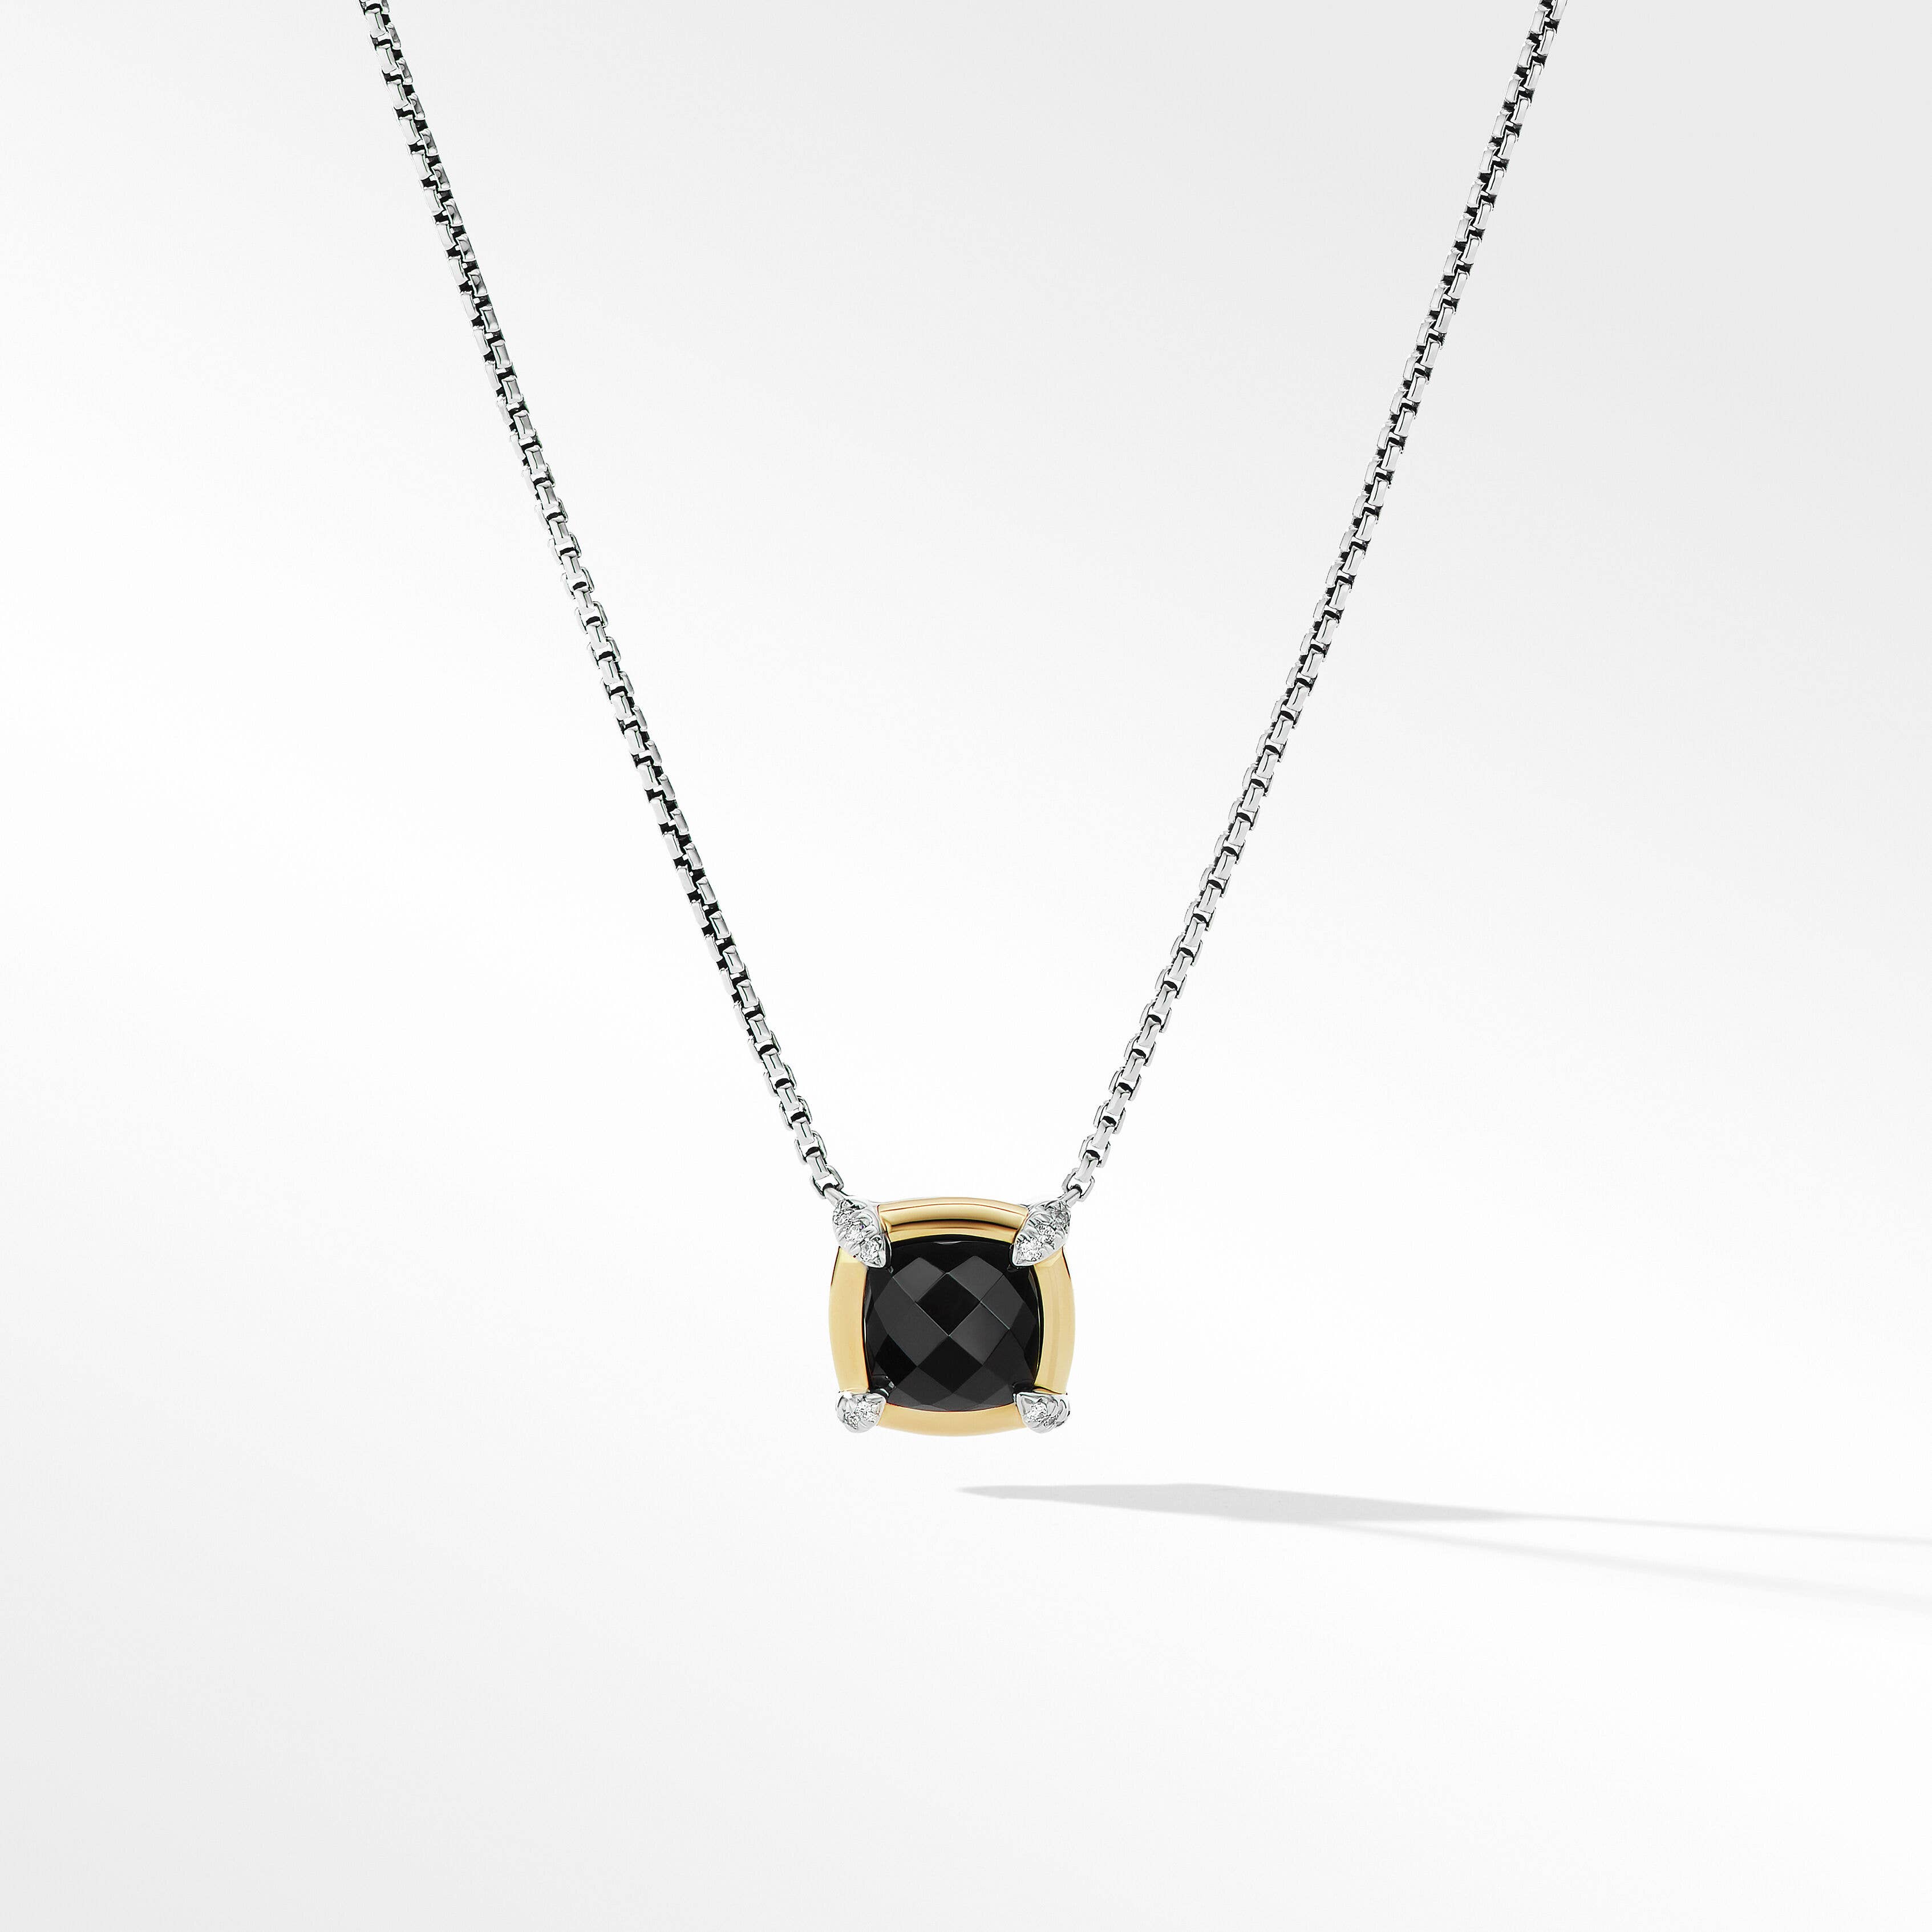 Petite Chatelaine® Pendant Necklace in Sterling Silver with Black Onyx, 18K Yellow Gold and Pavé Diamonds